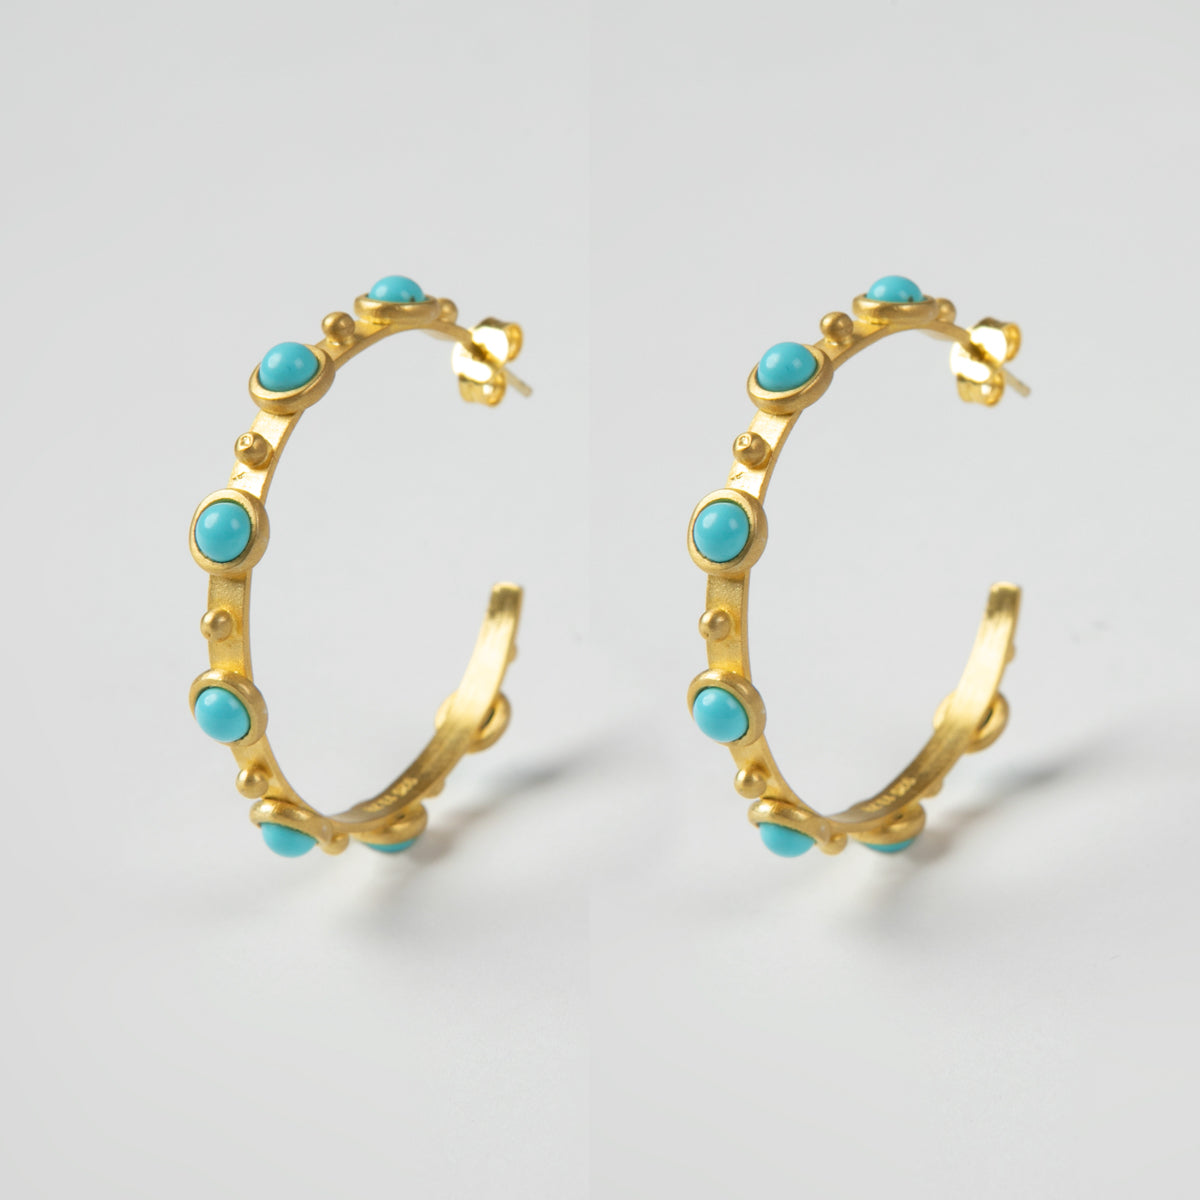 Dorothea Turquoise earrings silver 925° gold plated 22k by Pearl Martini